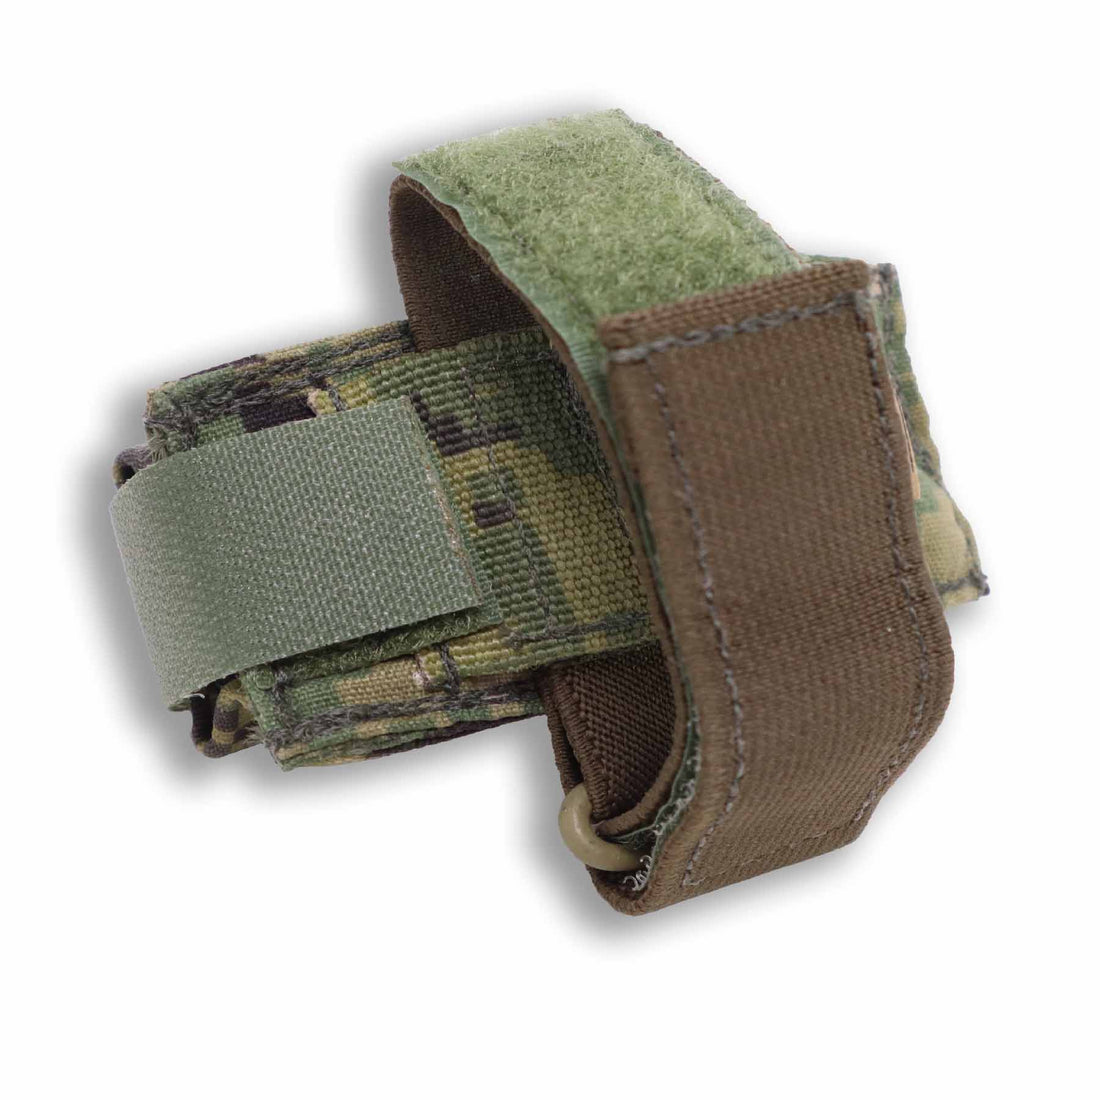 Gear - Pouches - Utility - Eagle Industries SOFLCS Foretrex GPS Chest/Wrist Pouch - AOR2